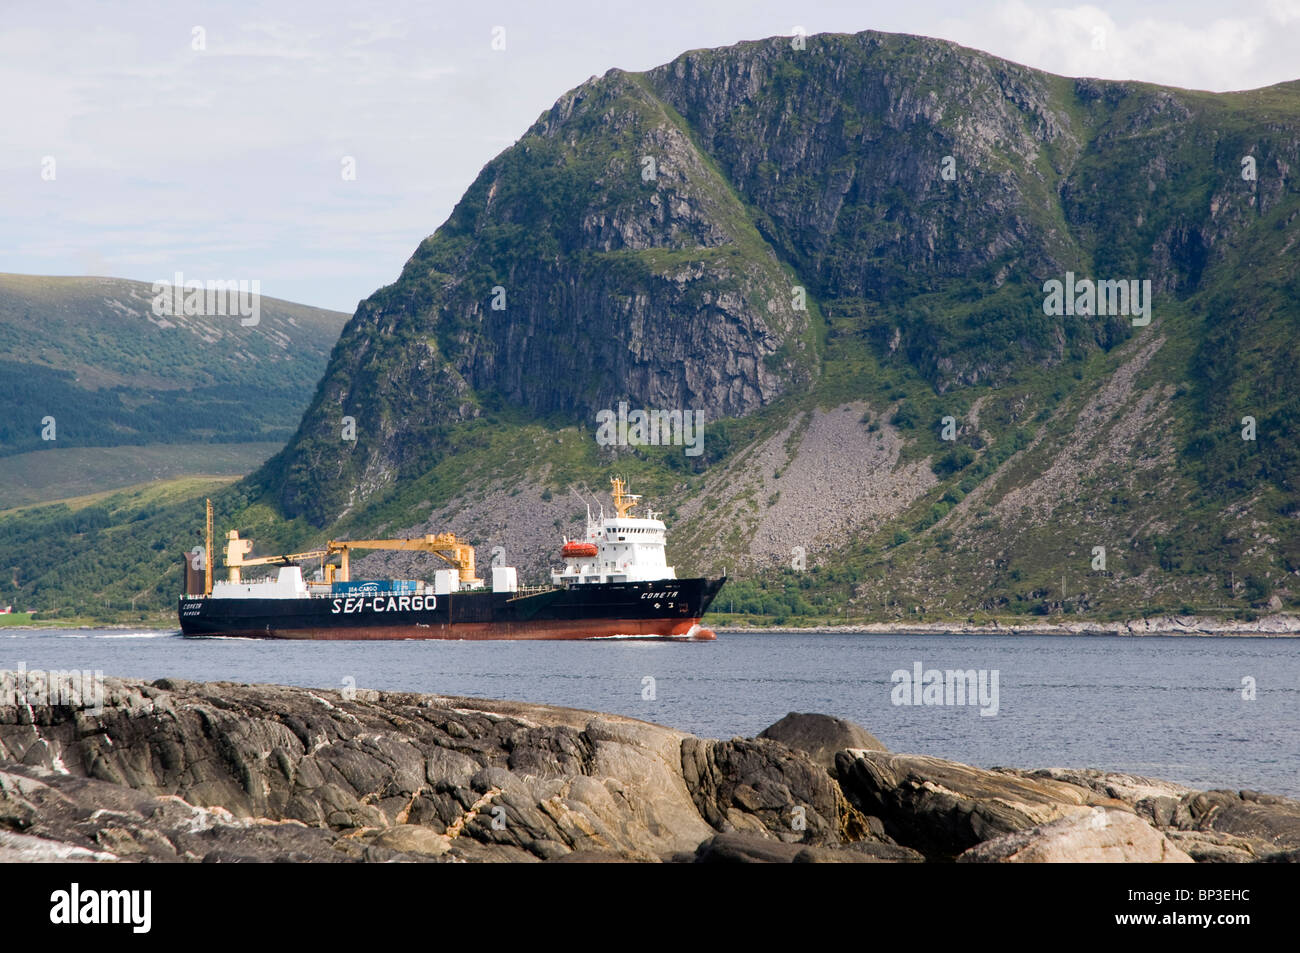 Sea cargo commercial vessel passing through the narrow sound between Sand Isle and the mainland on the way to Ulsteinvik. Stock Photo